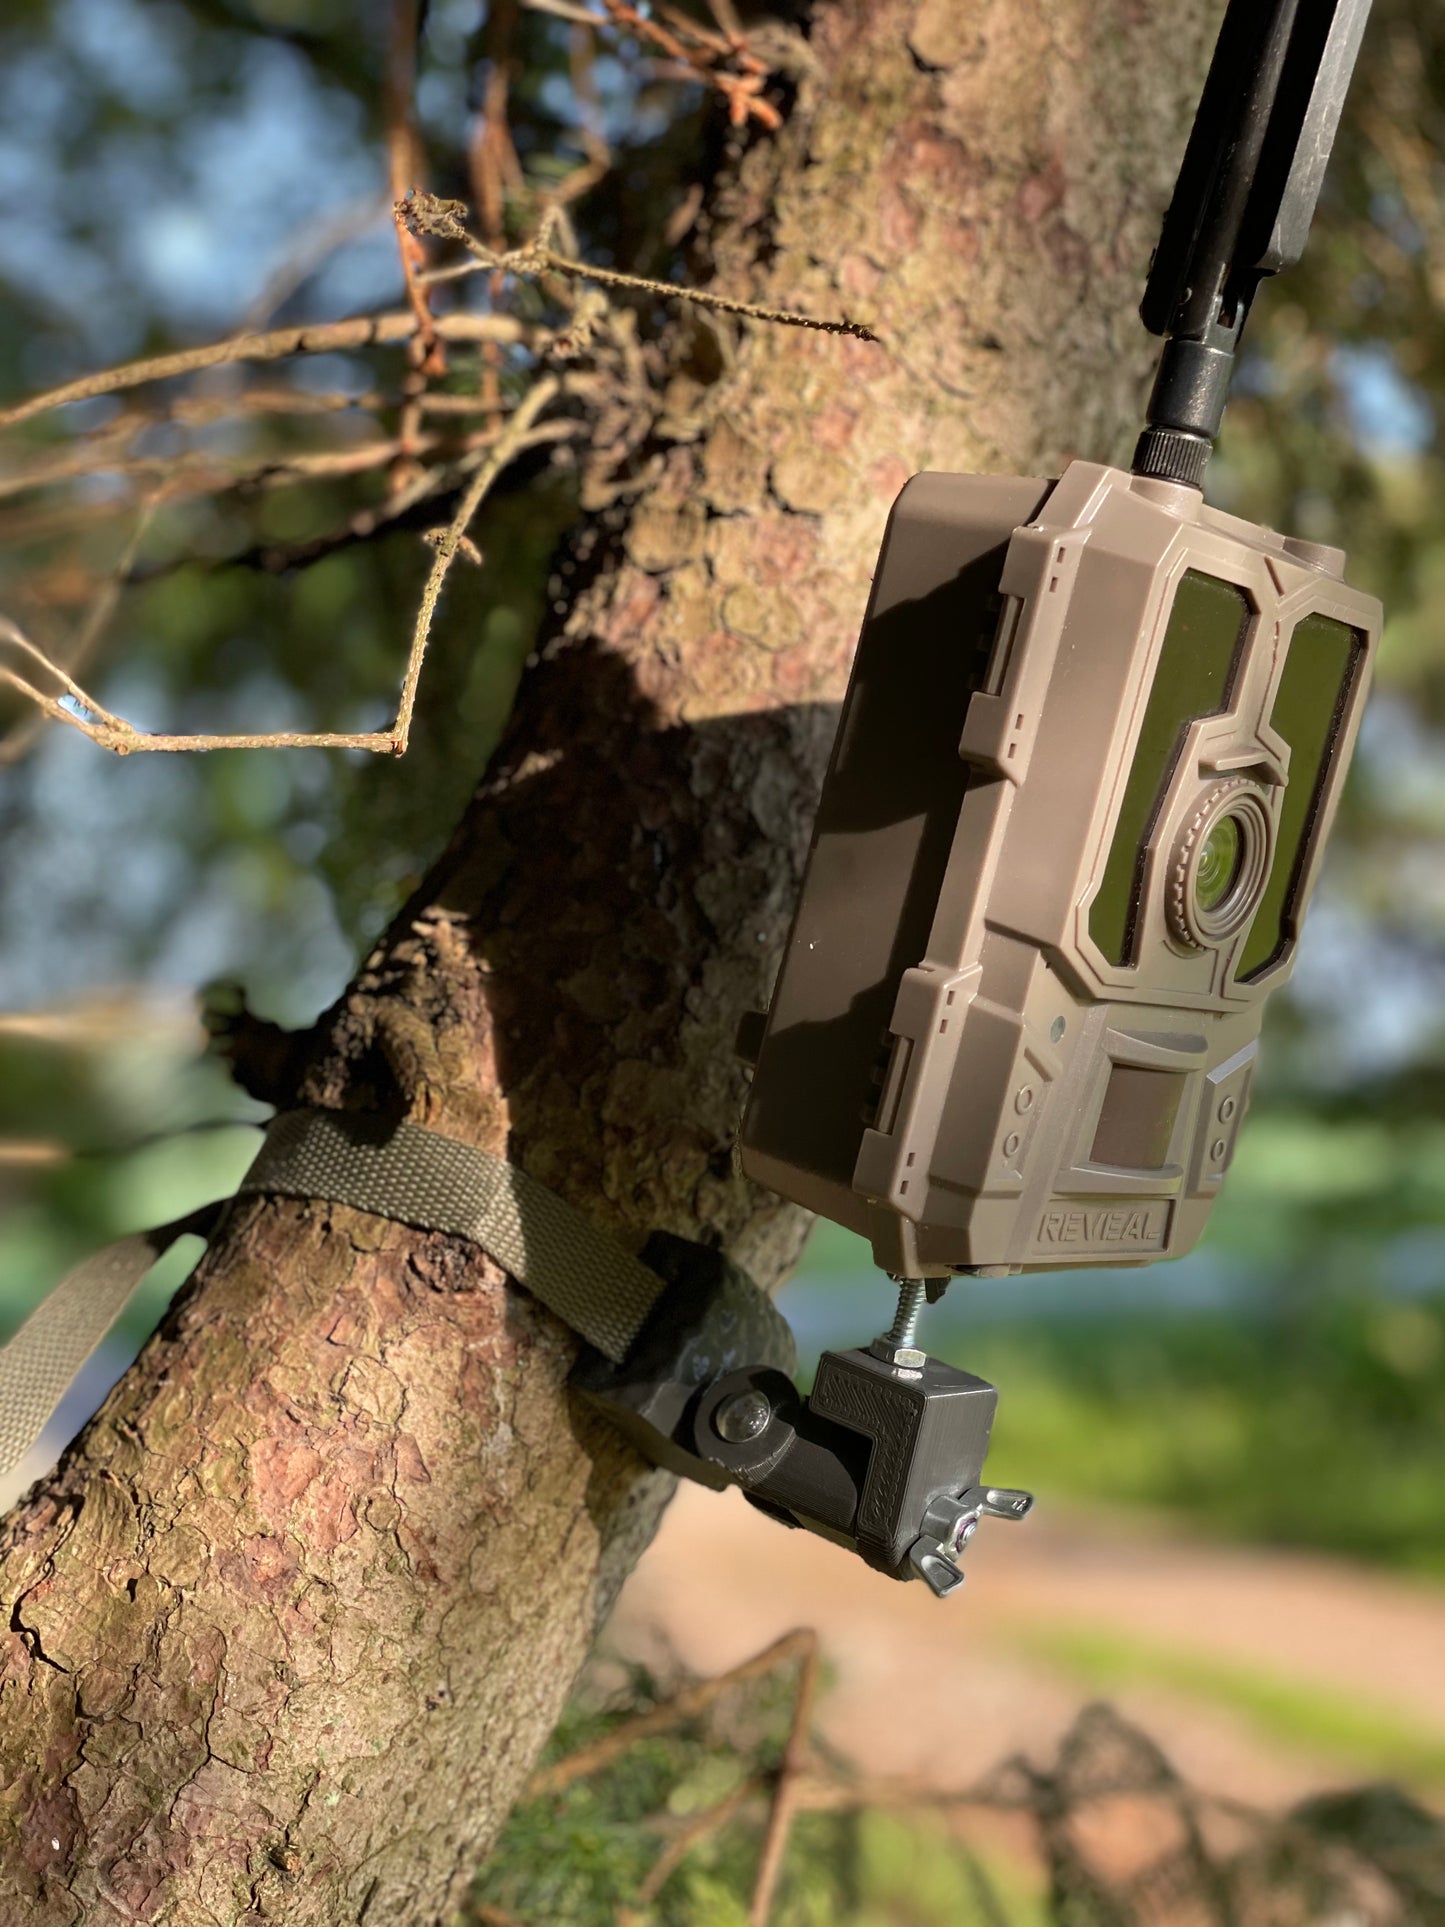 Lookout (Trail Camera Mount)